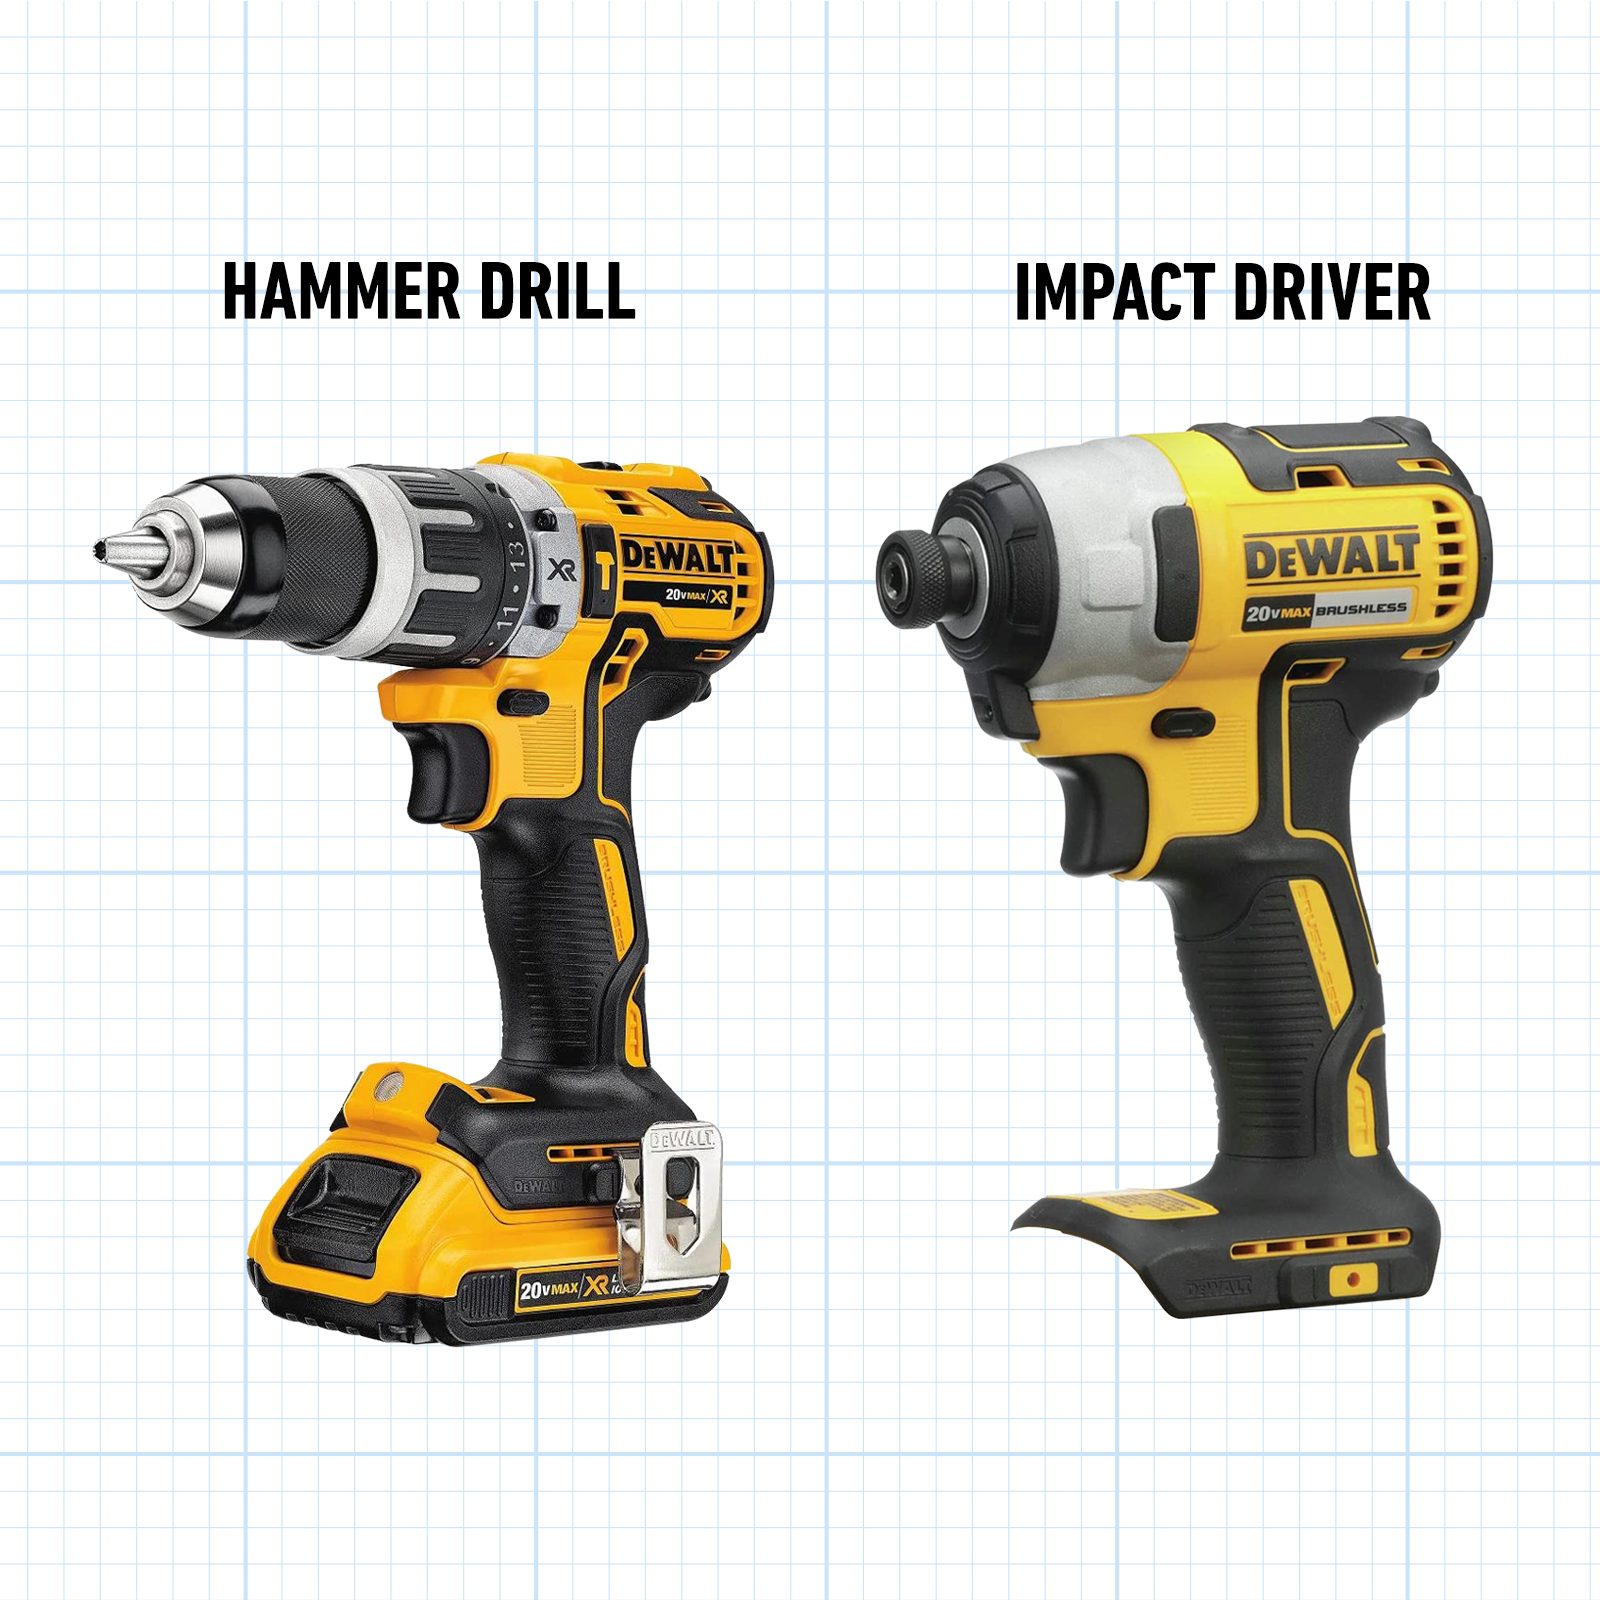 can a dewalt hammer drill be used as a regular drill?